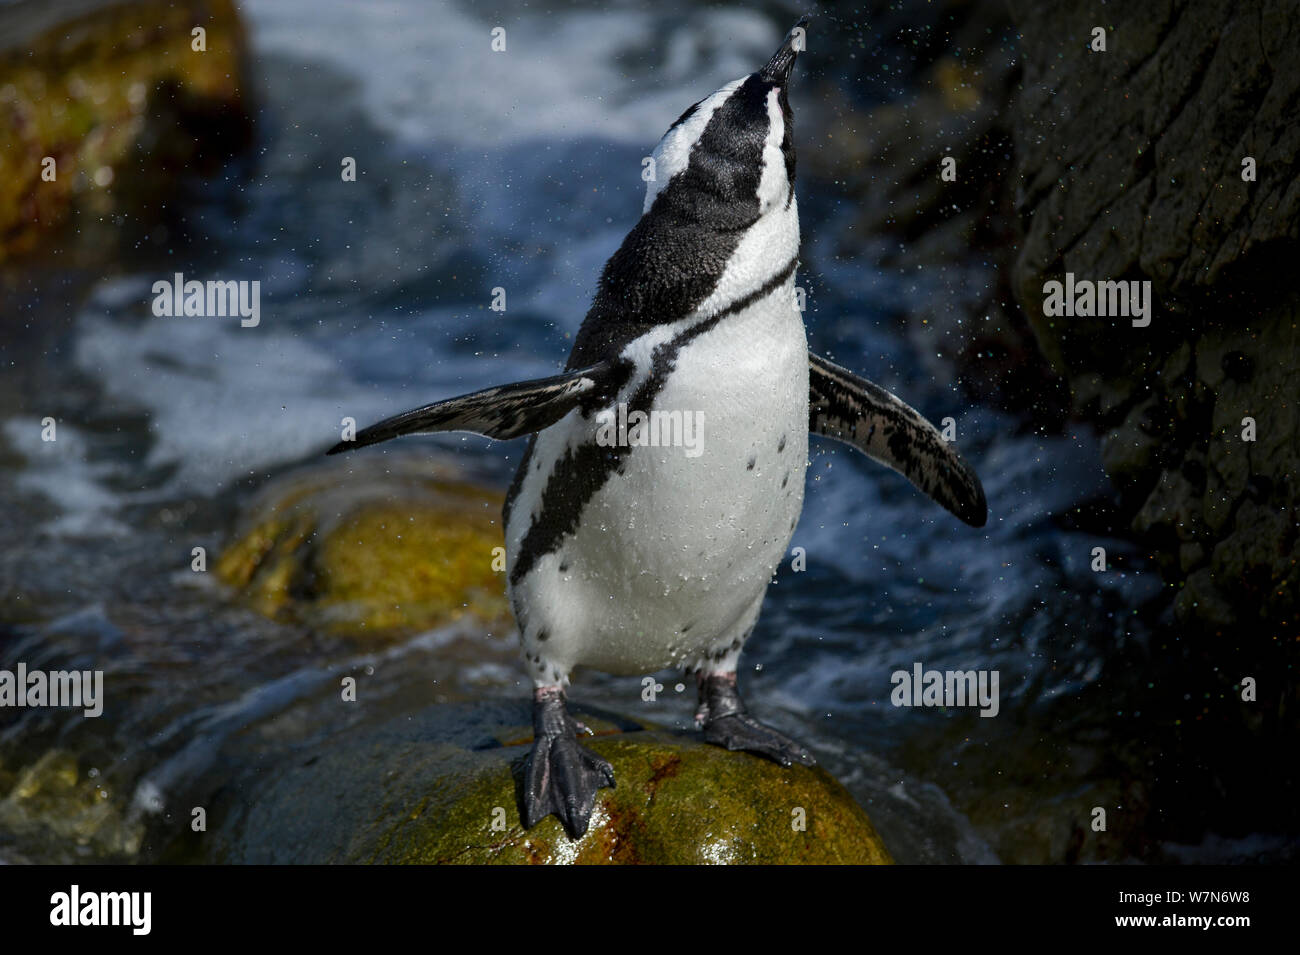 Black footed penguin (Spheniscus demersus) Stony Point, Betty's Bay, South Africa Stock Photo